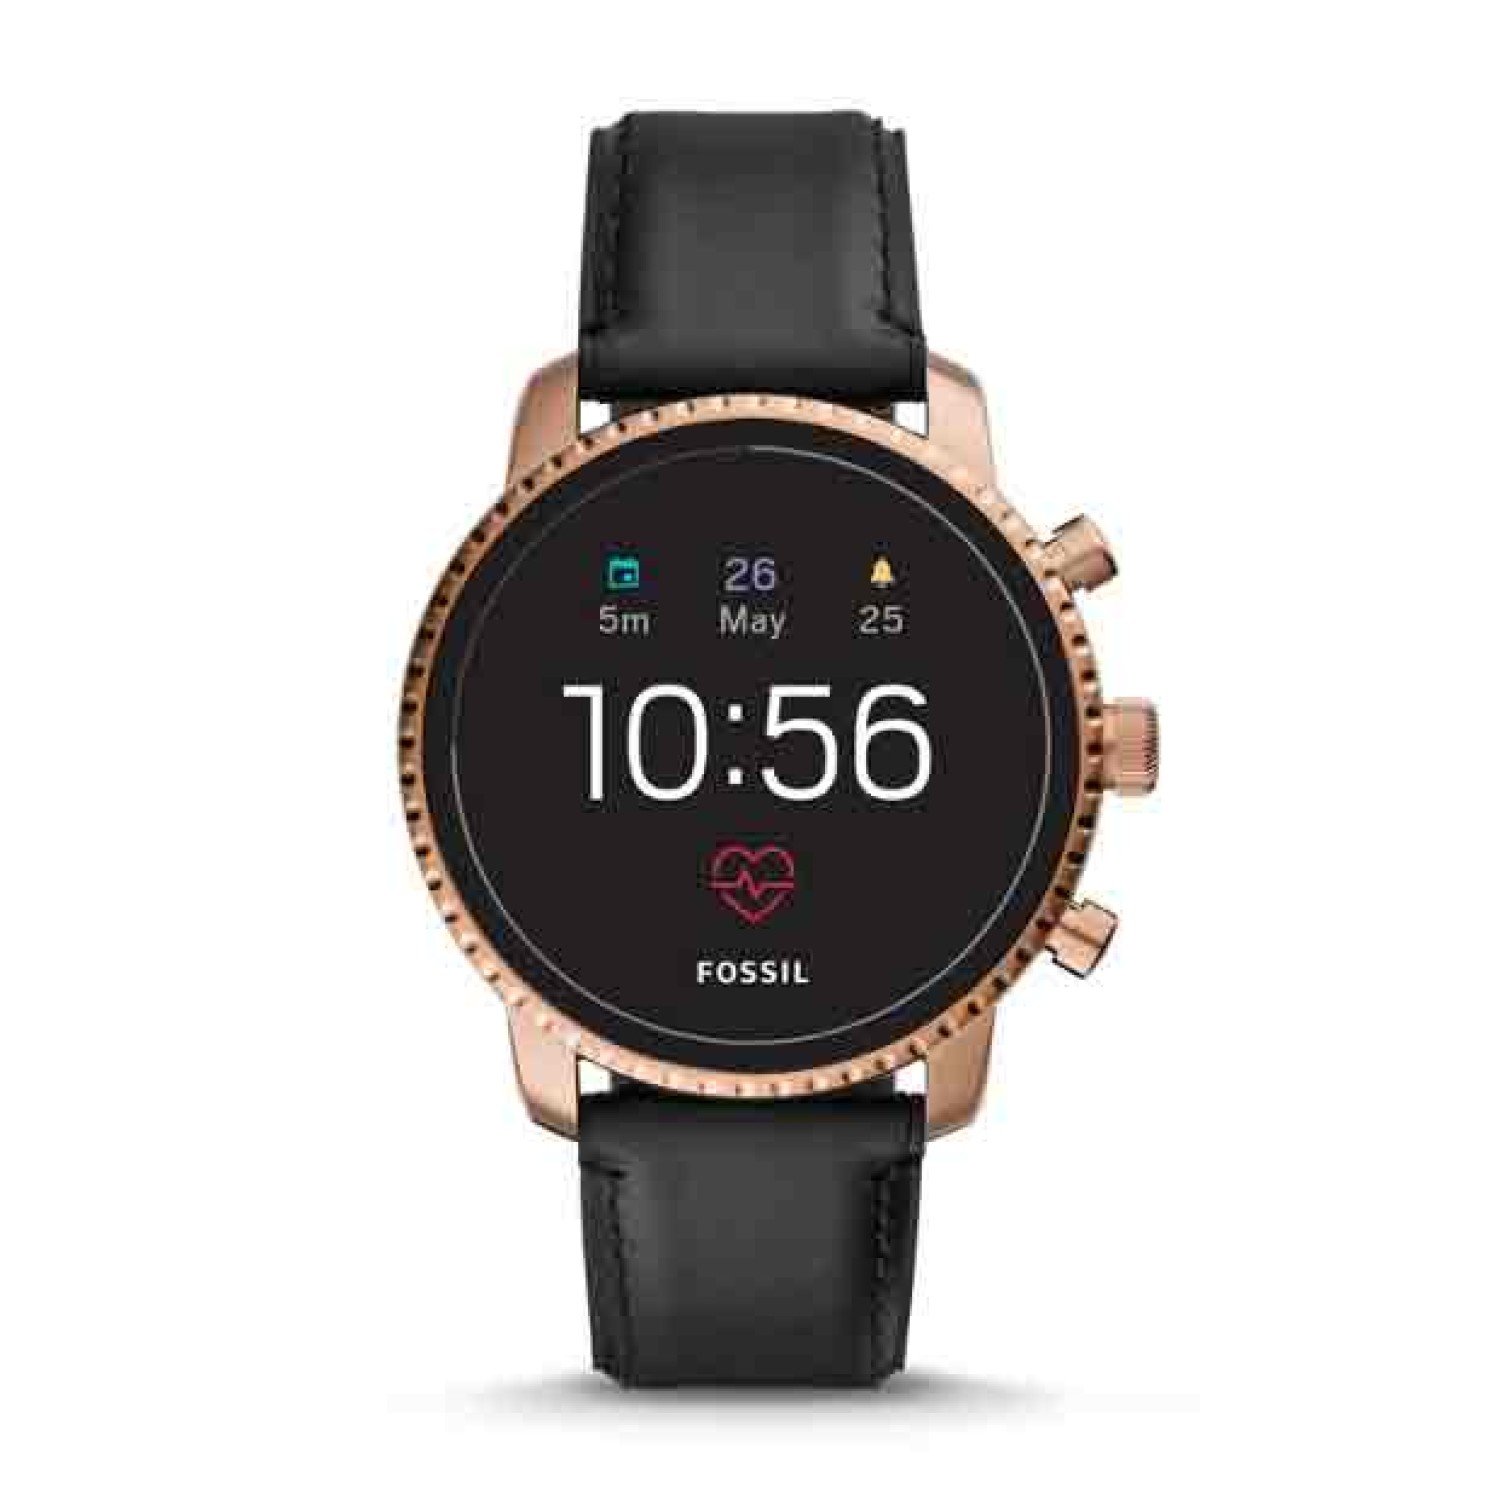 FTW4017 Fossil Gen 4 Smartwatch  Q Explorist Heart Rate. Classic Design. Modern Tech. This 45mm Q Explorist HR touchscreen smartwatch features a Black leather strap, and lets you track your heart rate, receive notifications, customise your dial and more. 